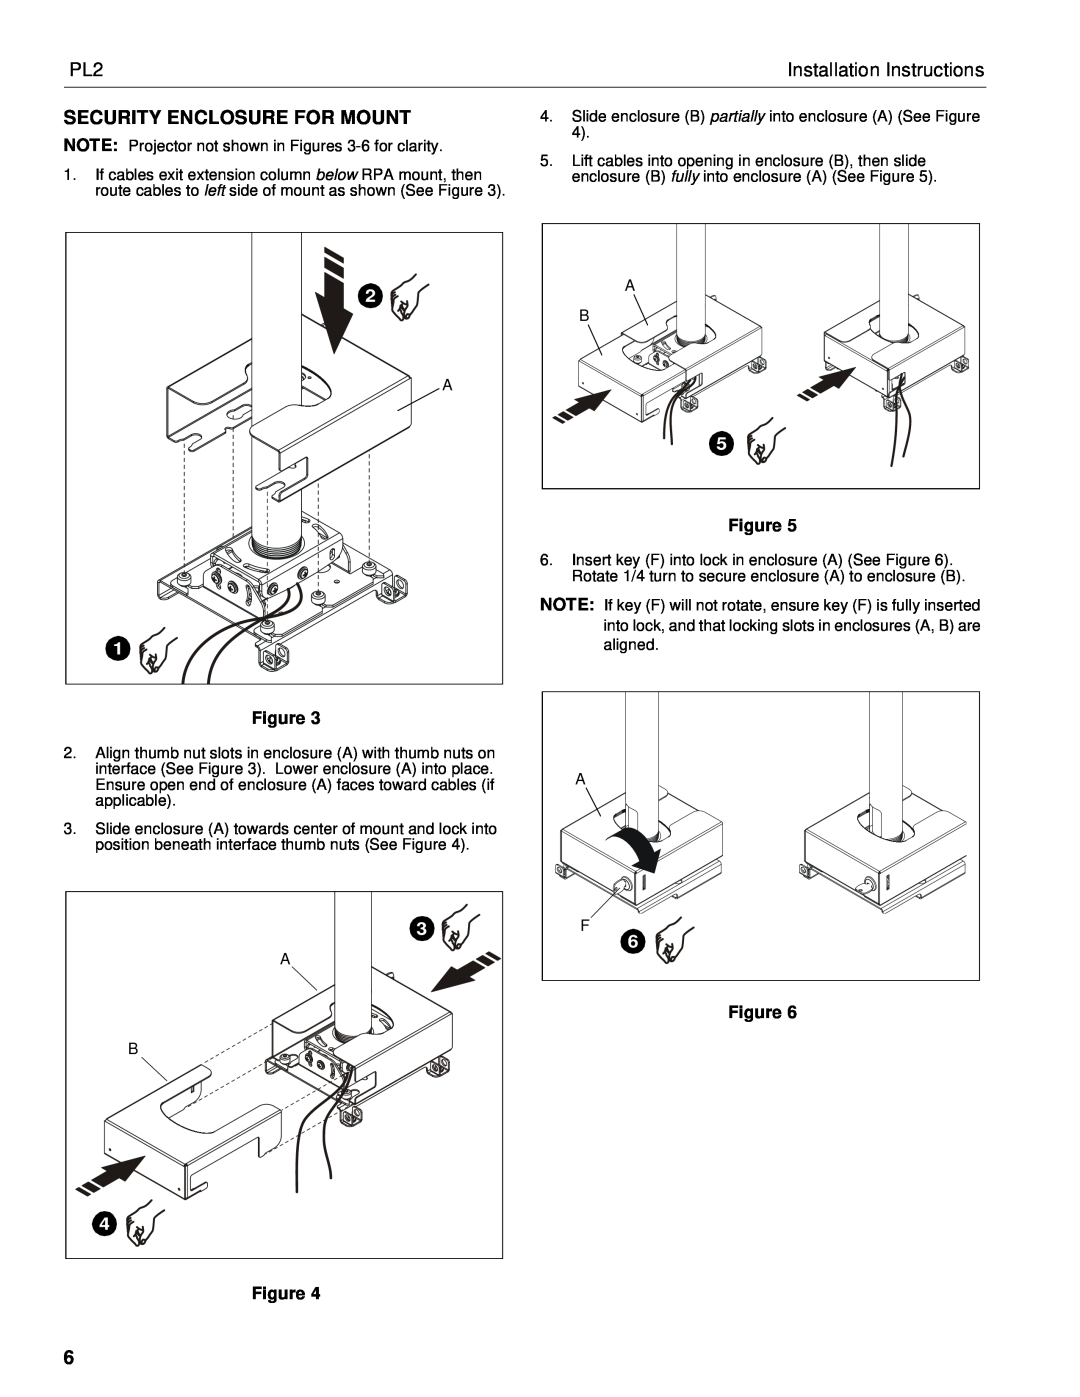 Chief Manufacturing PL2 installation instructions Security Enclosure For Mount, Installation Instructions 